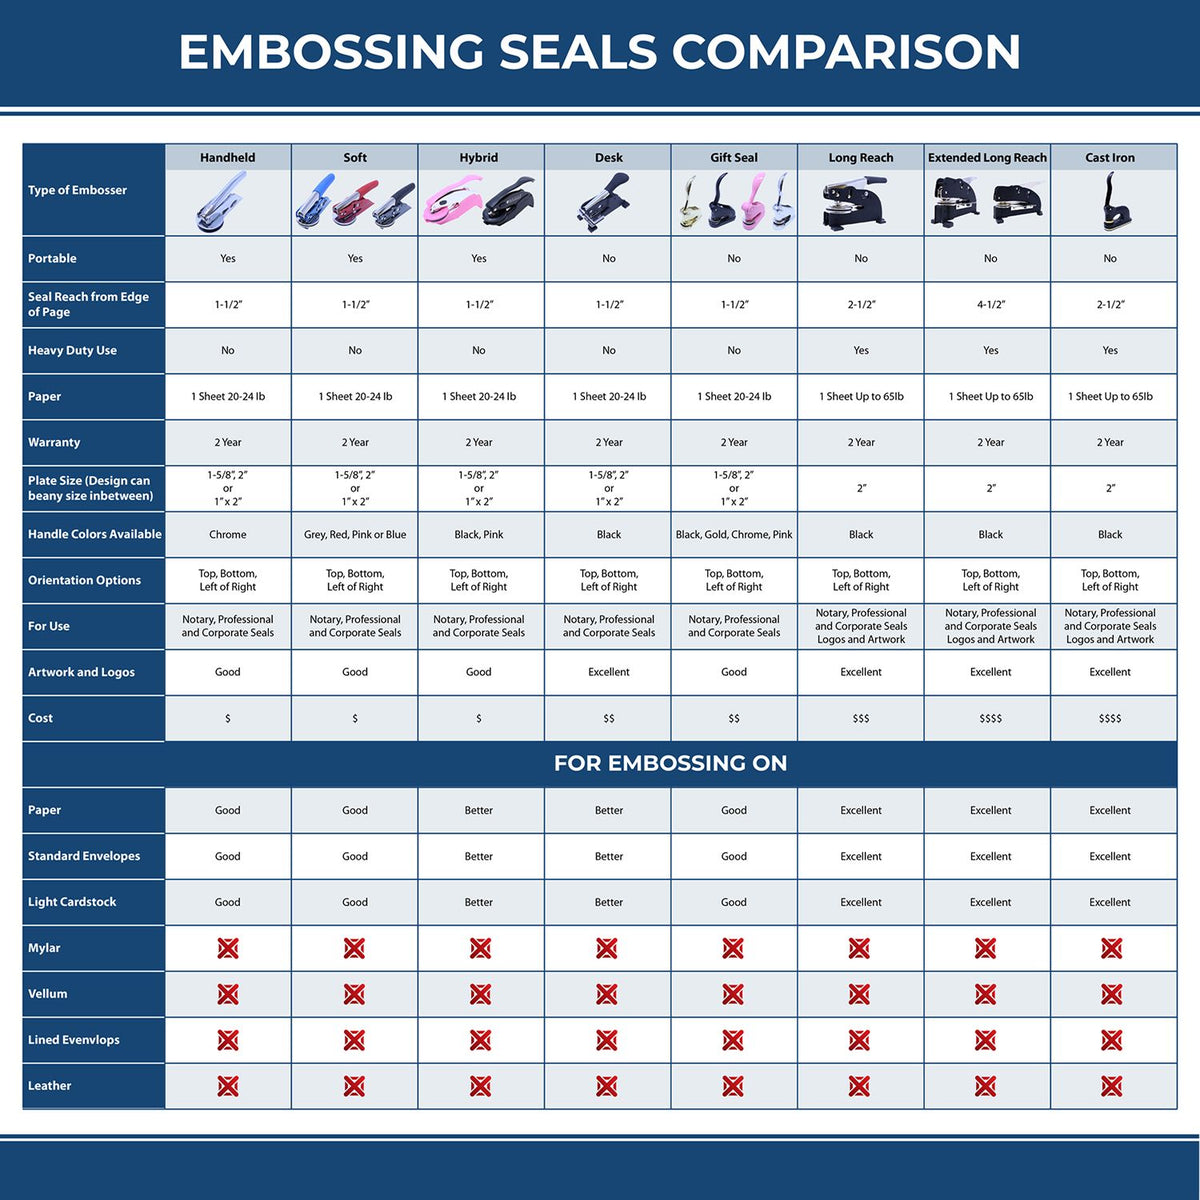 A comparison chart for the different types of mount models available for the Extended Long Reach Indiana Surveyor Embosser.